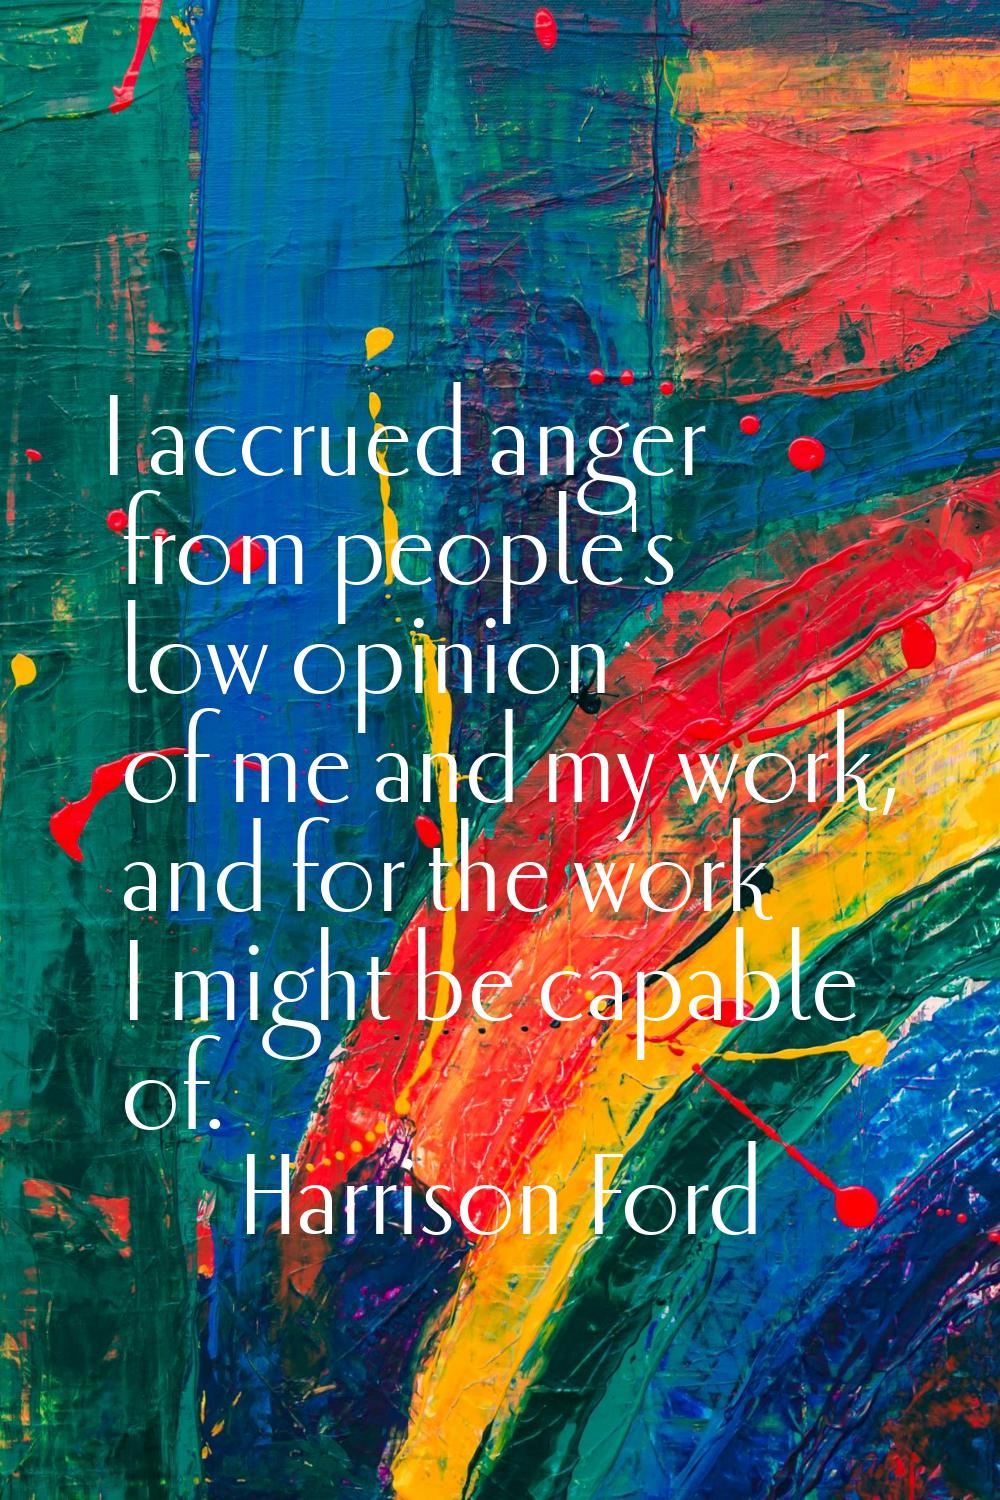 I accrued anger from people's low opinion of me and my work, and for the work I might be capable of